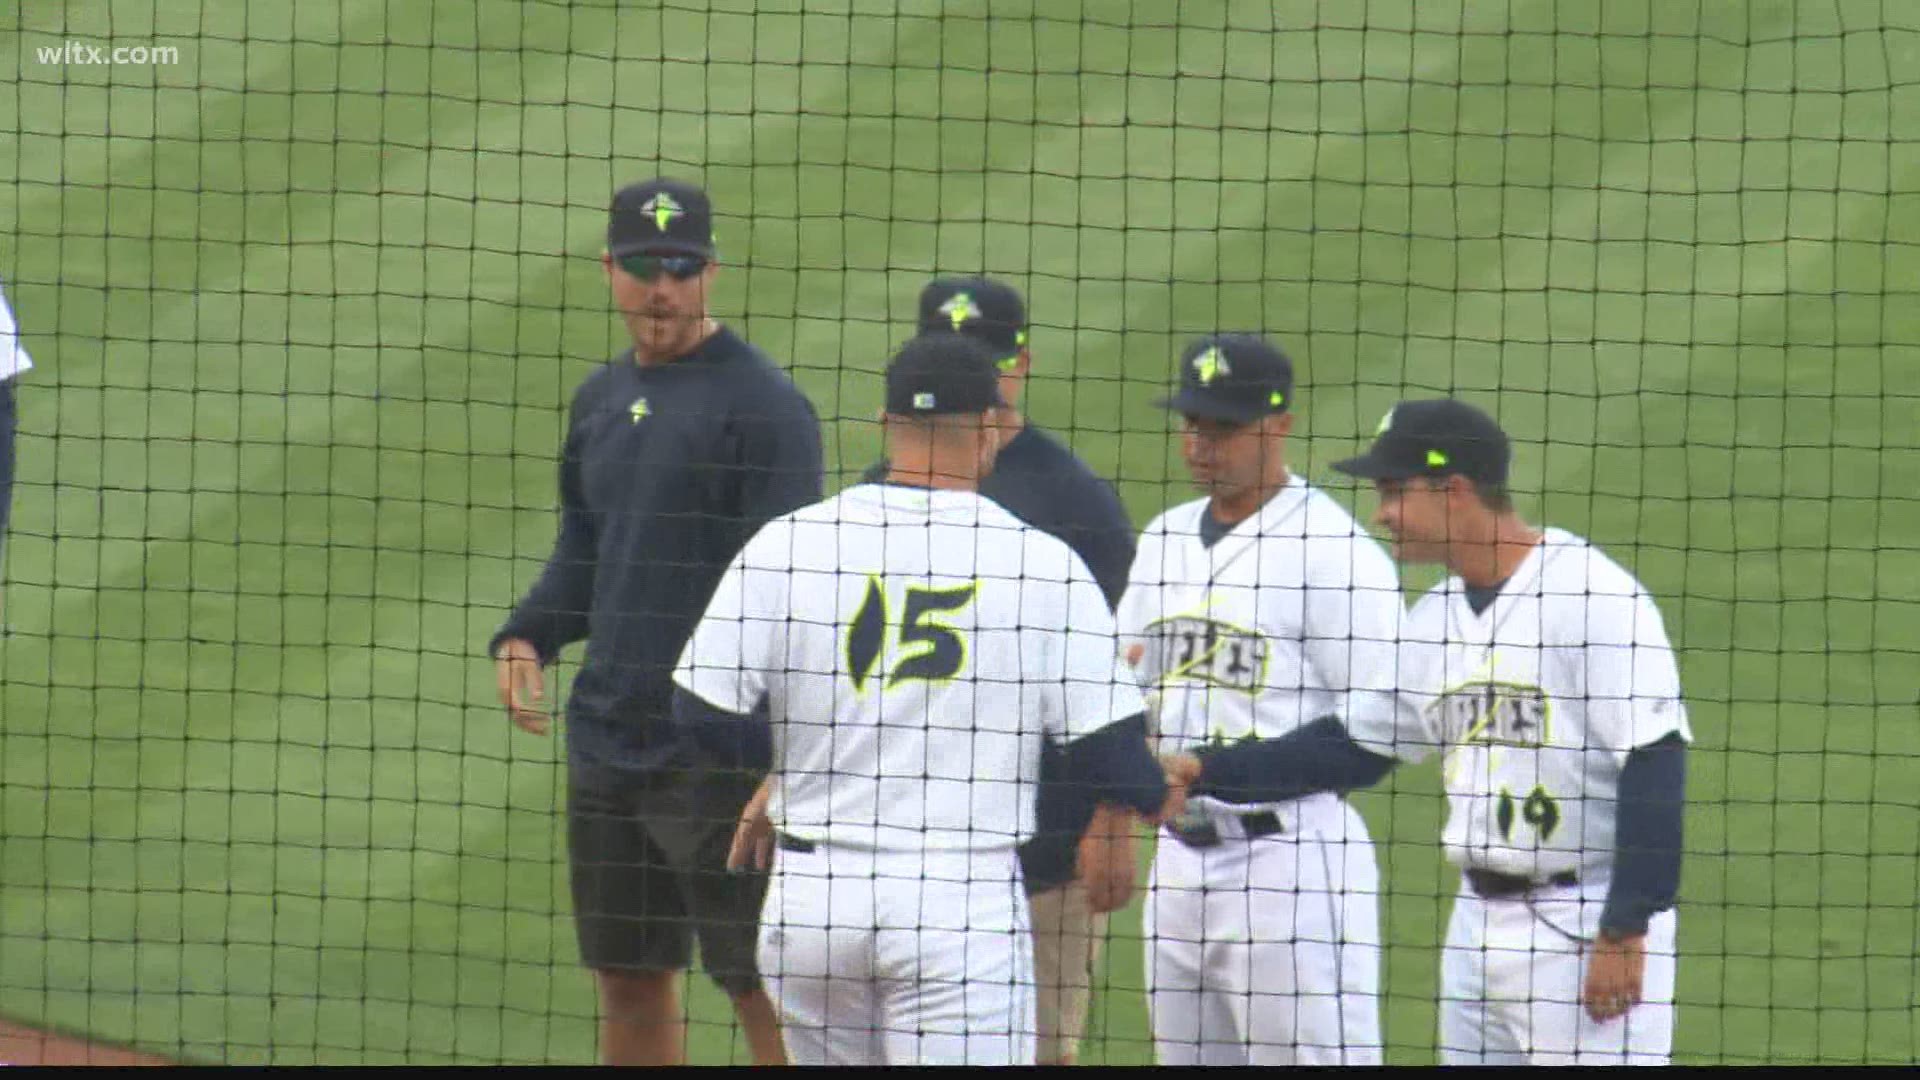 The most famous Columbia Fireflies alumnus is retiring after a five-year minor league career.